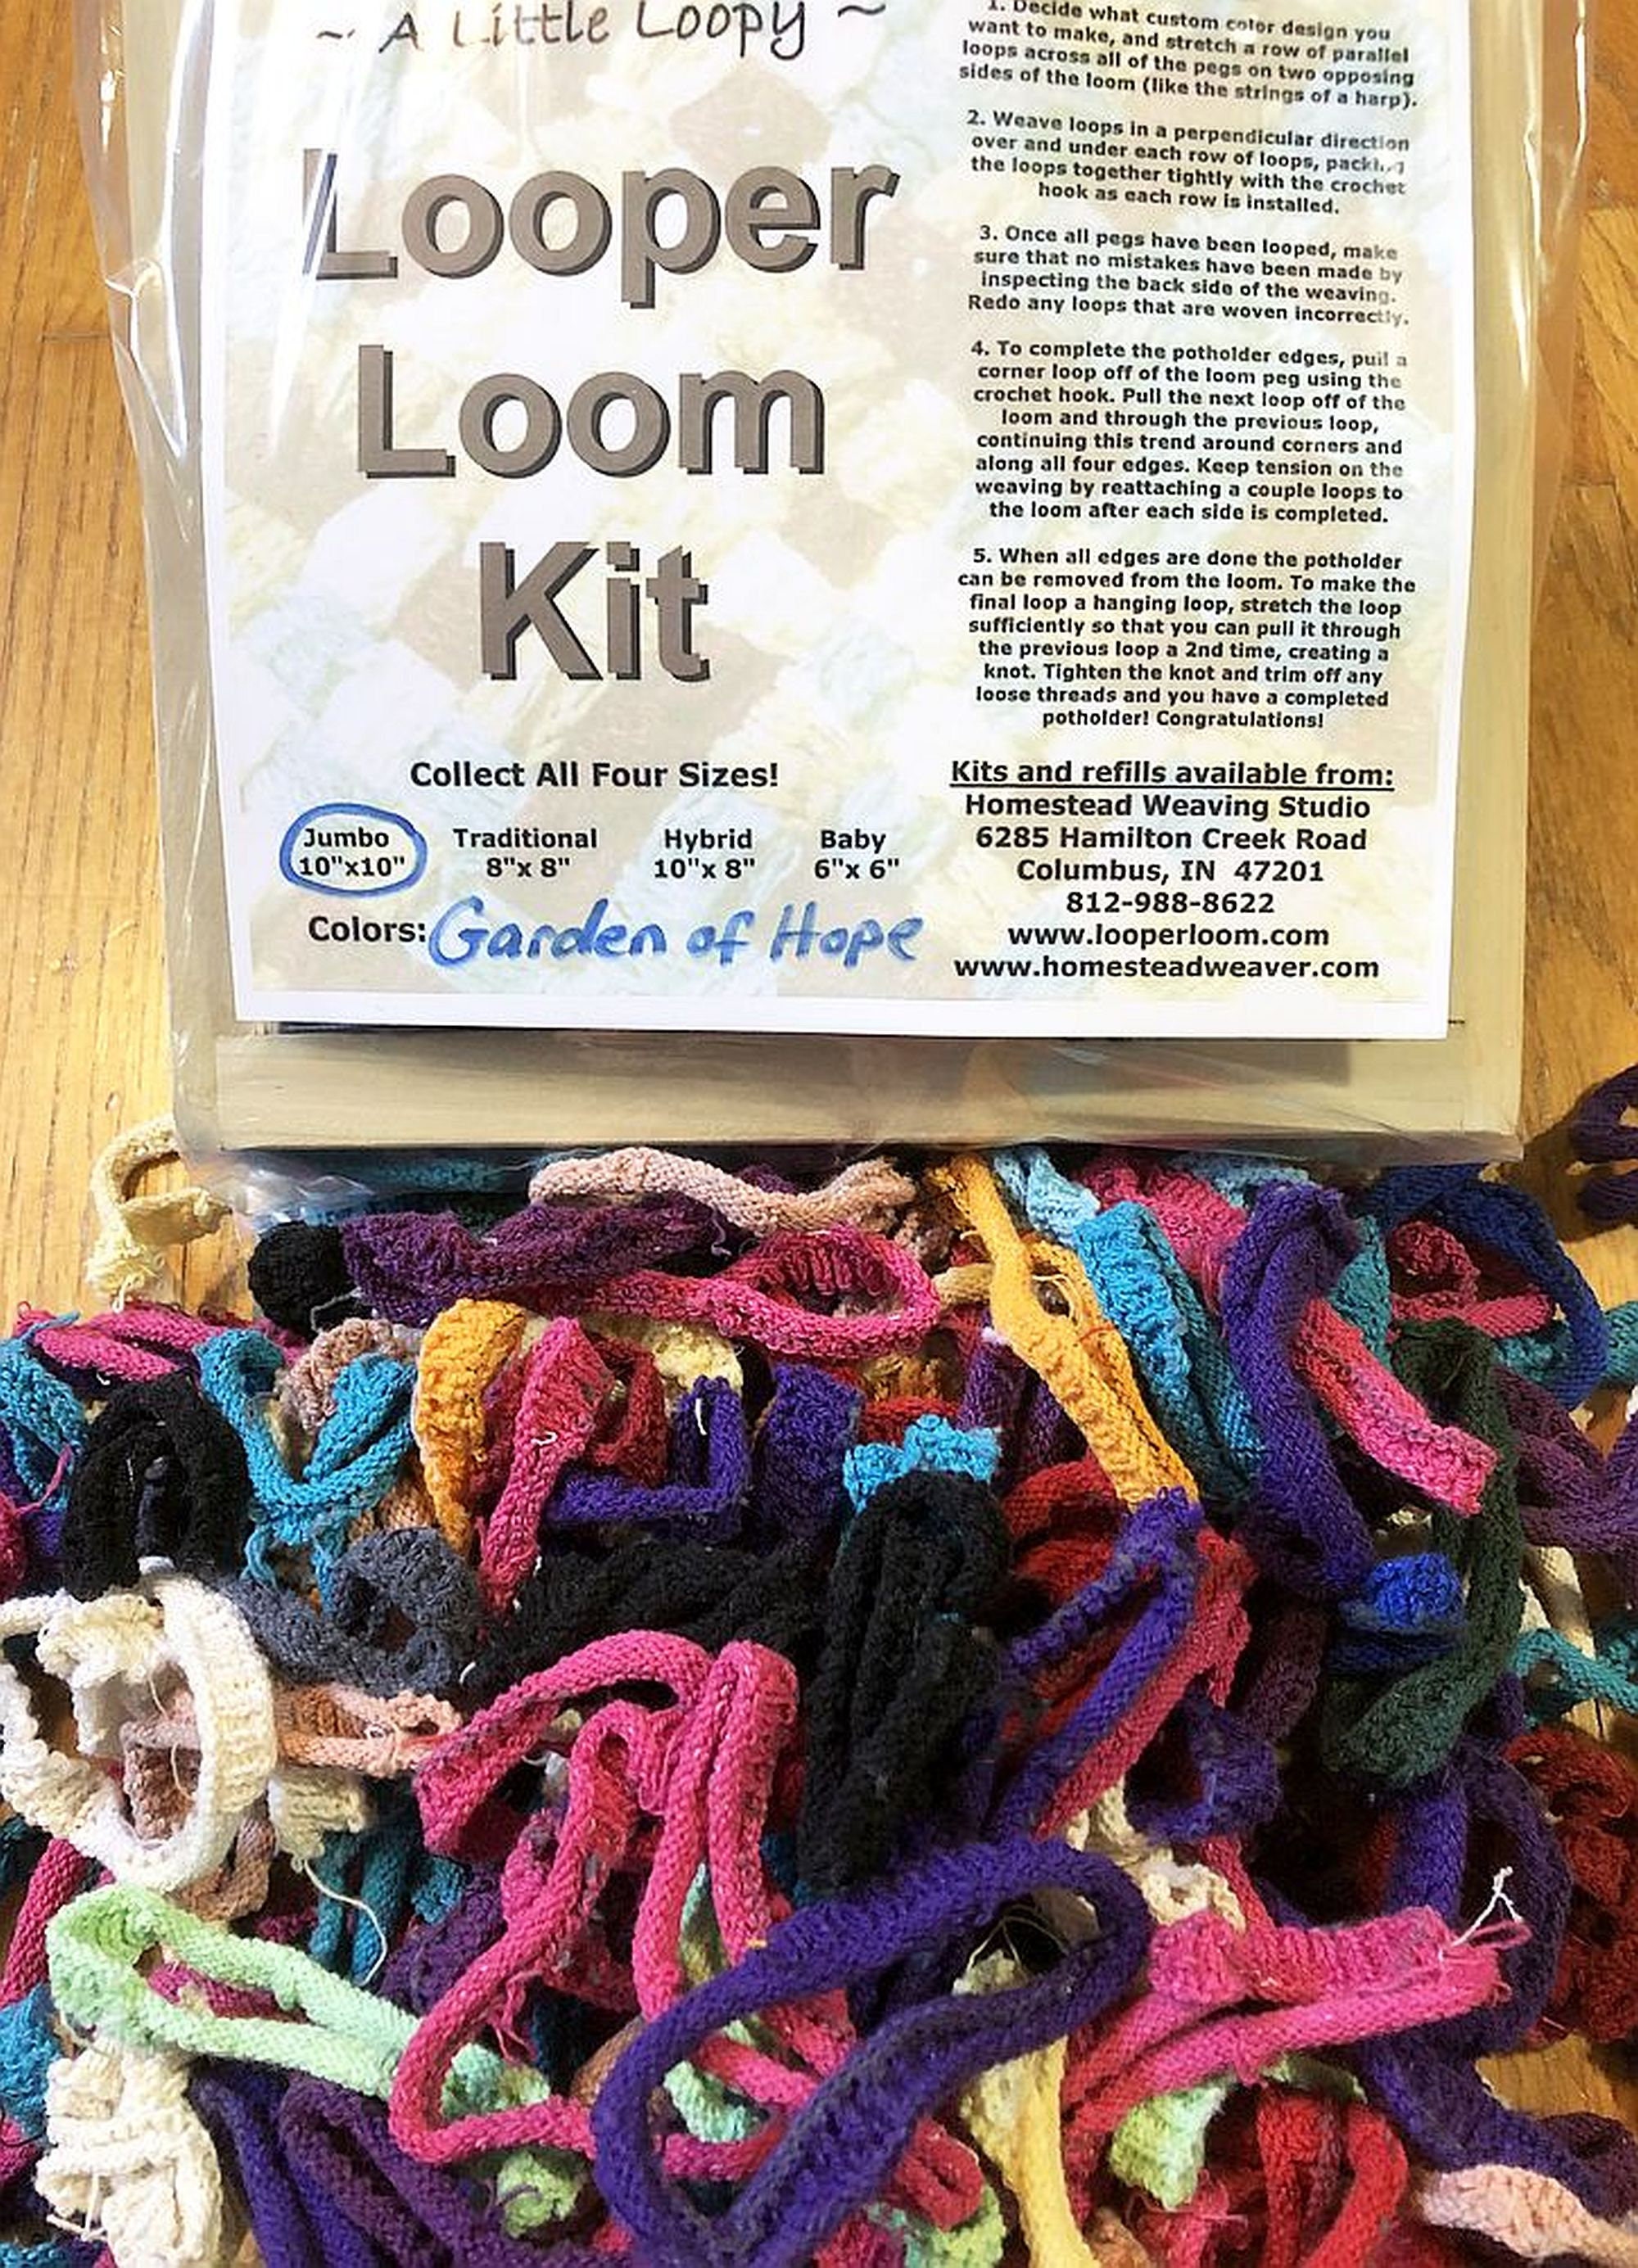 Potholder Jumbo 10 Wood Loom Kit, 1.5lbs Assorted Colors Cotton Loops,  U.S.A. Made, Craft Supplies, Sock Loopers, Weaving, Rugs, Recycling 